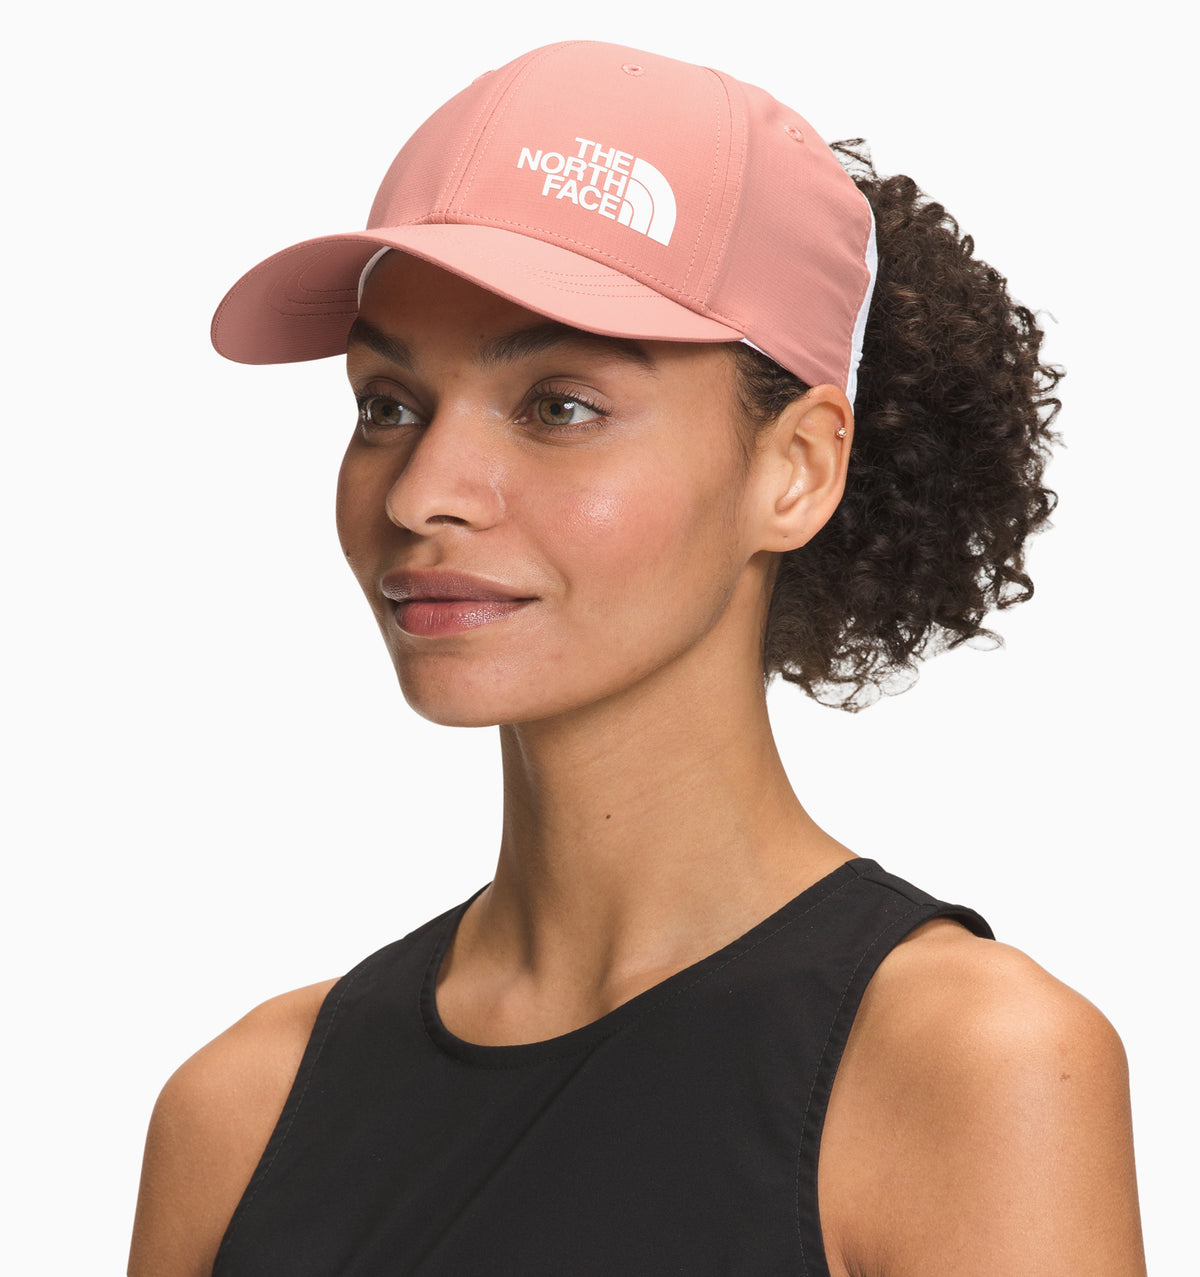 The North Face Women's Horizon Hat - Rose Dawn